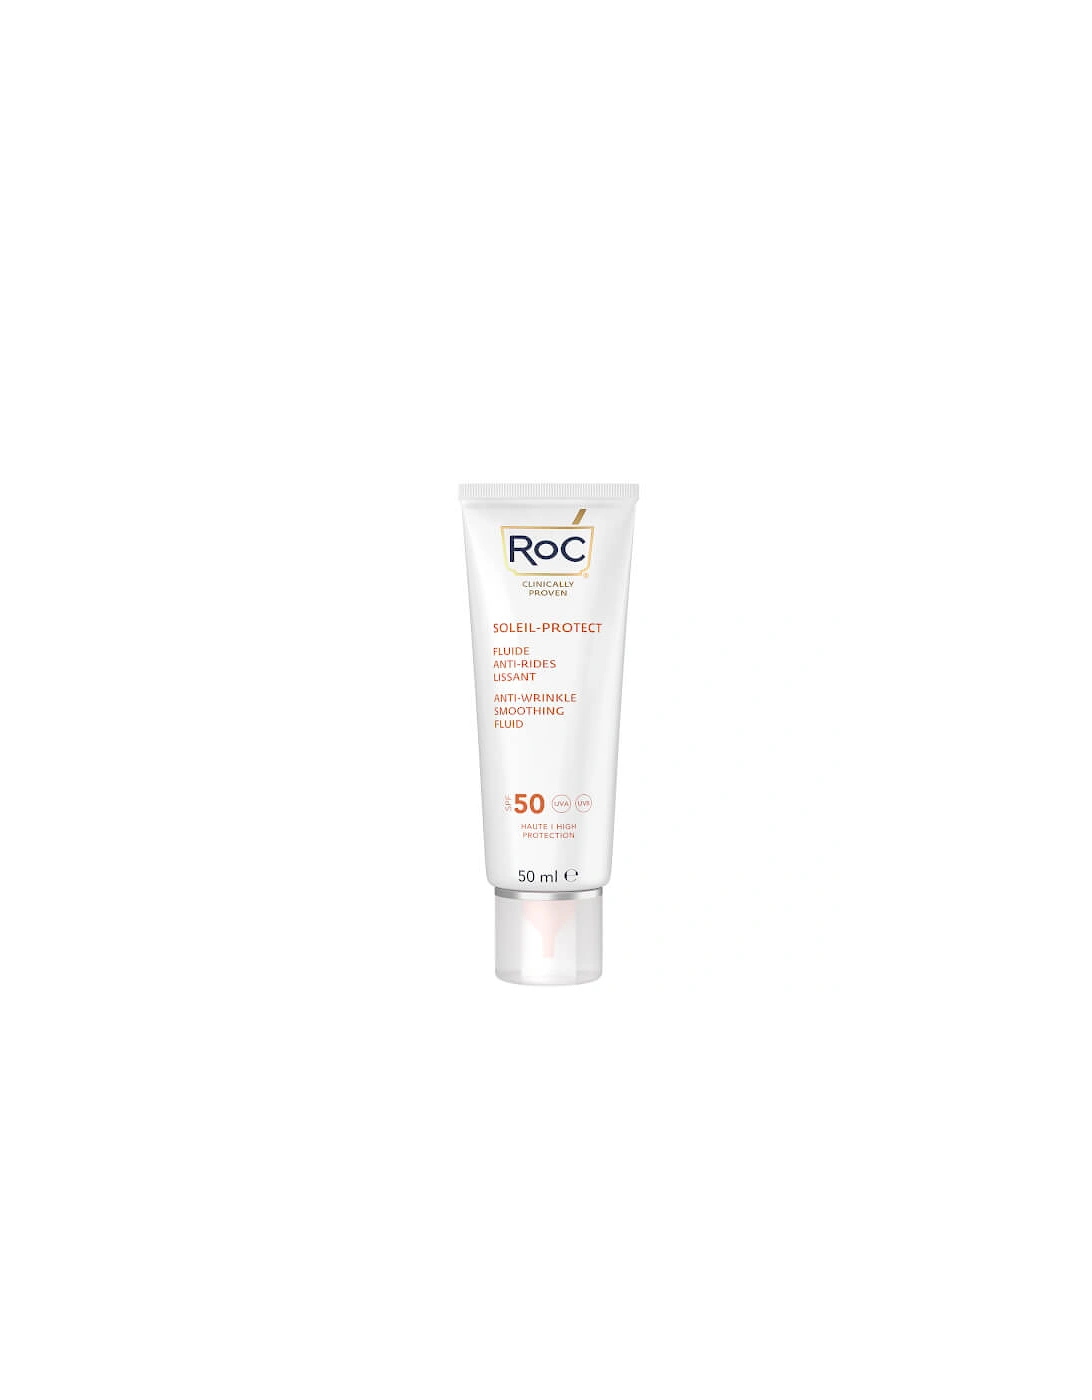 RoC Soleil-Protect Anti-Wrinkle Smoothing Fluid SPF50 50ml, 2 of 1